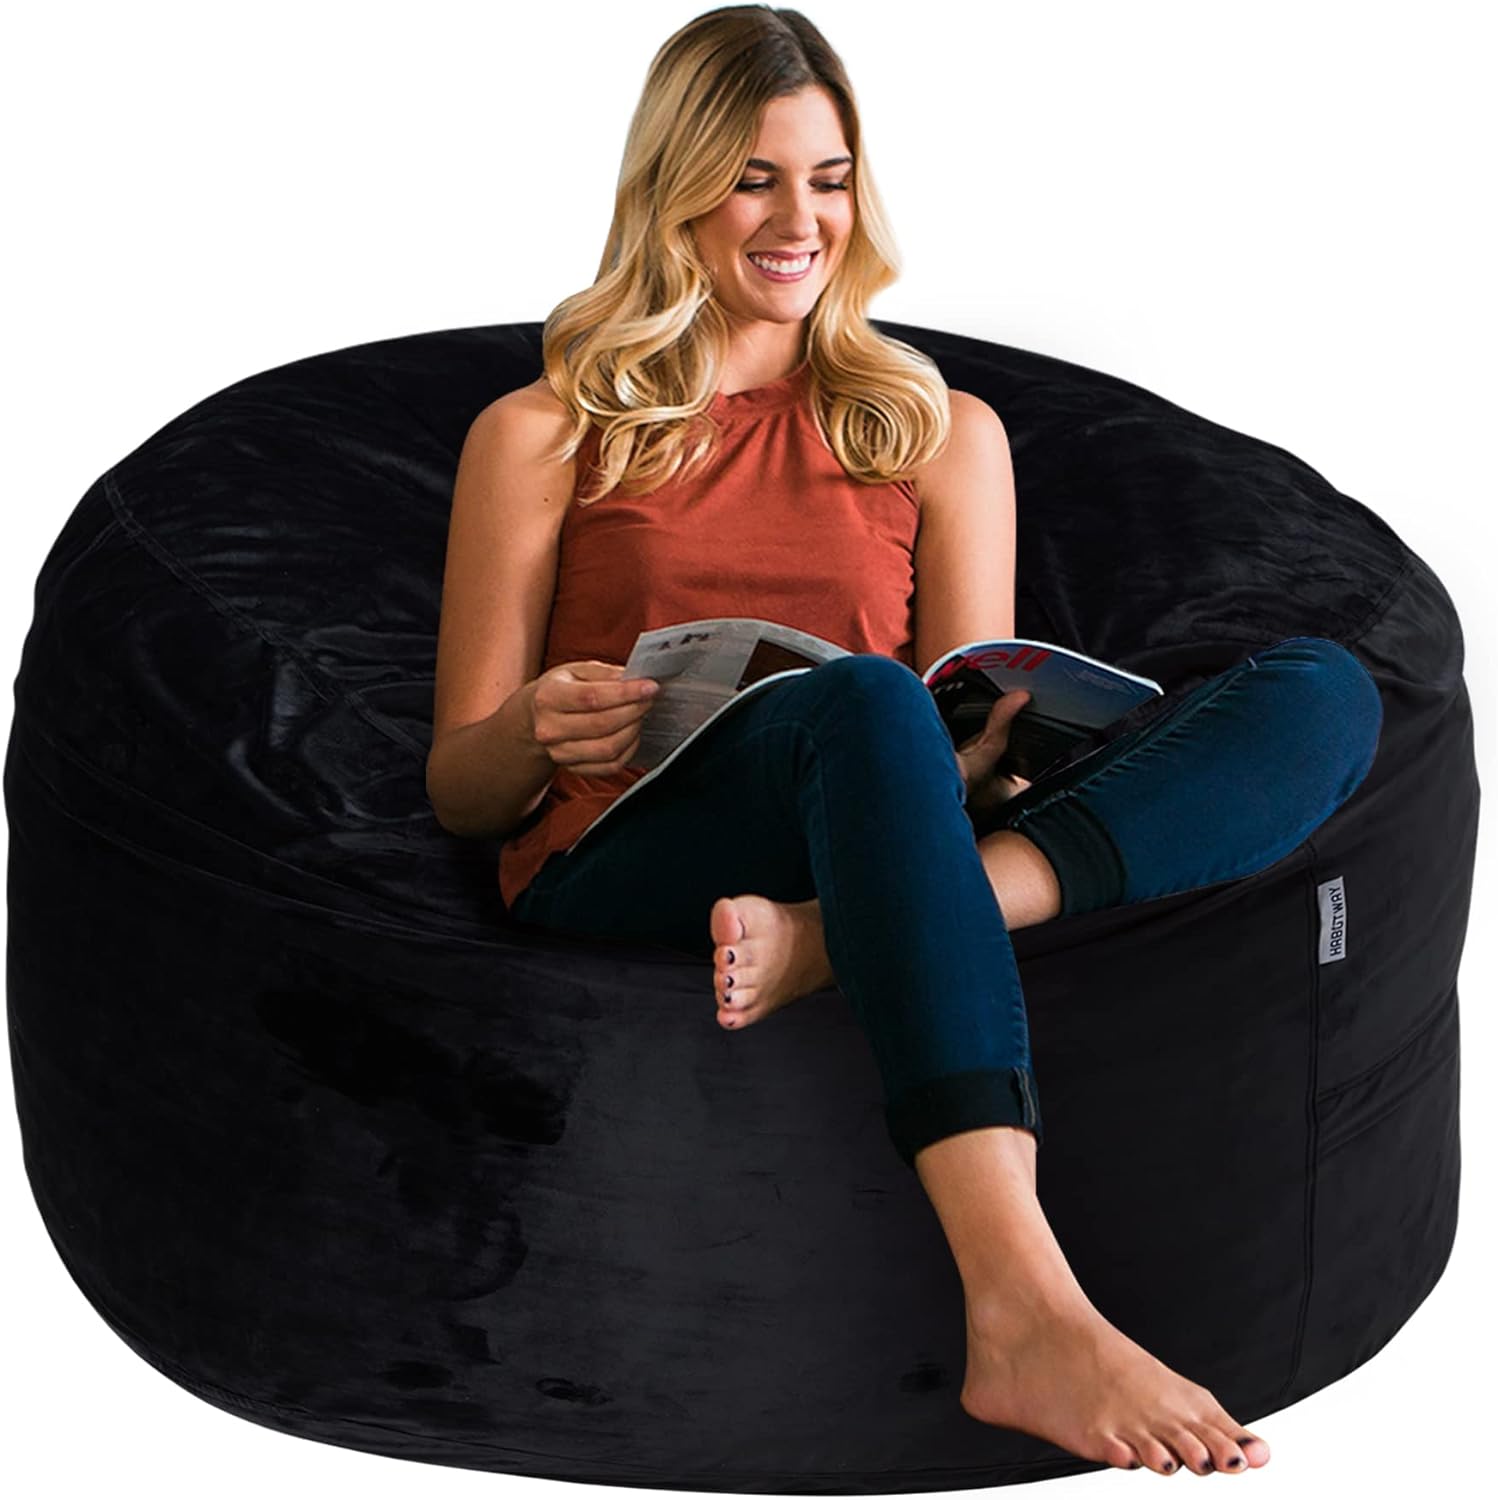 HABUTWAY Bean Bag Chair 3Ft Luxurious Velvet Ultra Soft Fur with High-Rebound Memory Foam Bean Bag Chairs for Adults Plush Lazy Sofa with Fluffy Removable Sponge 3'(Black New)